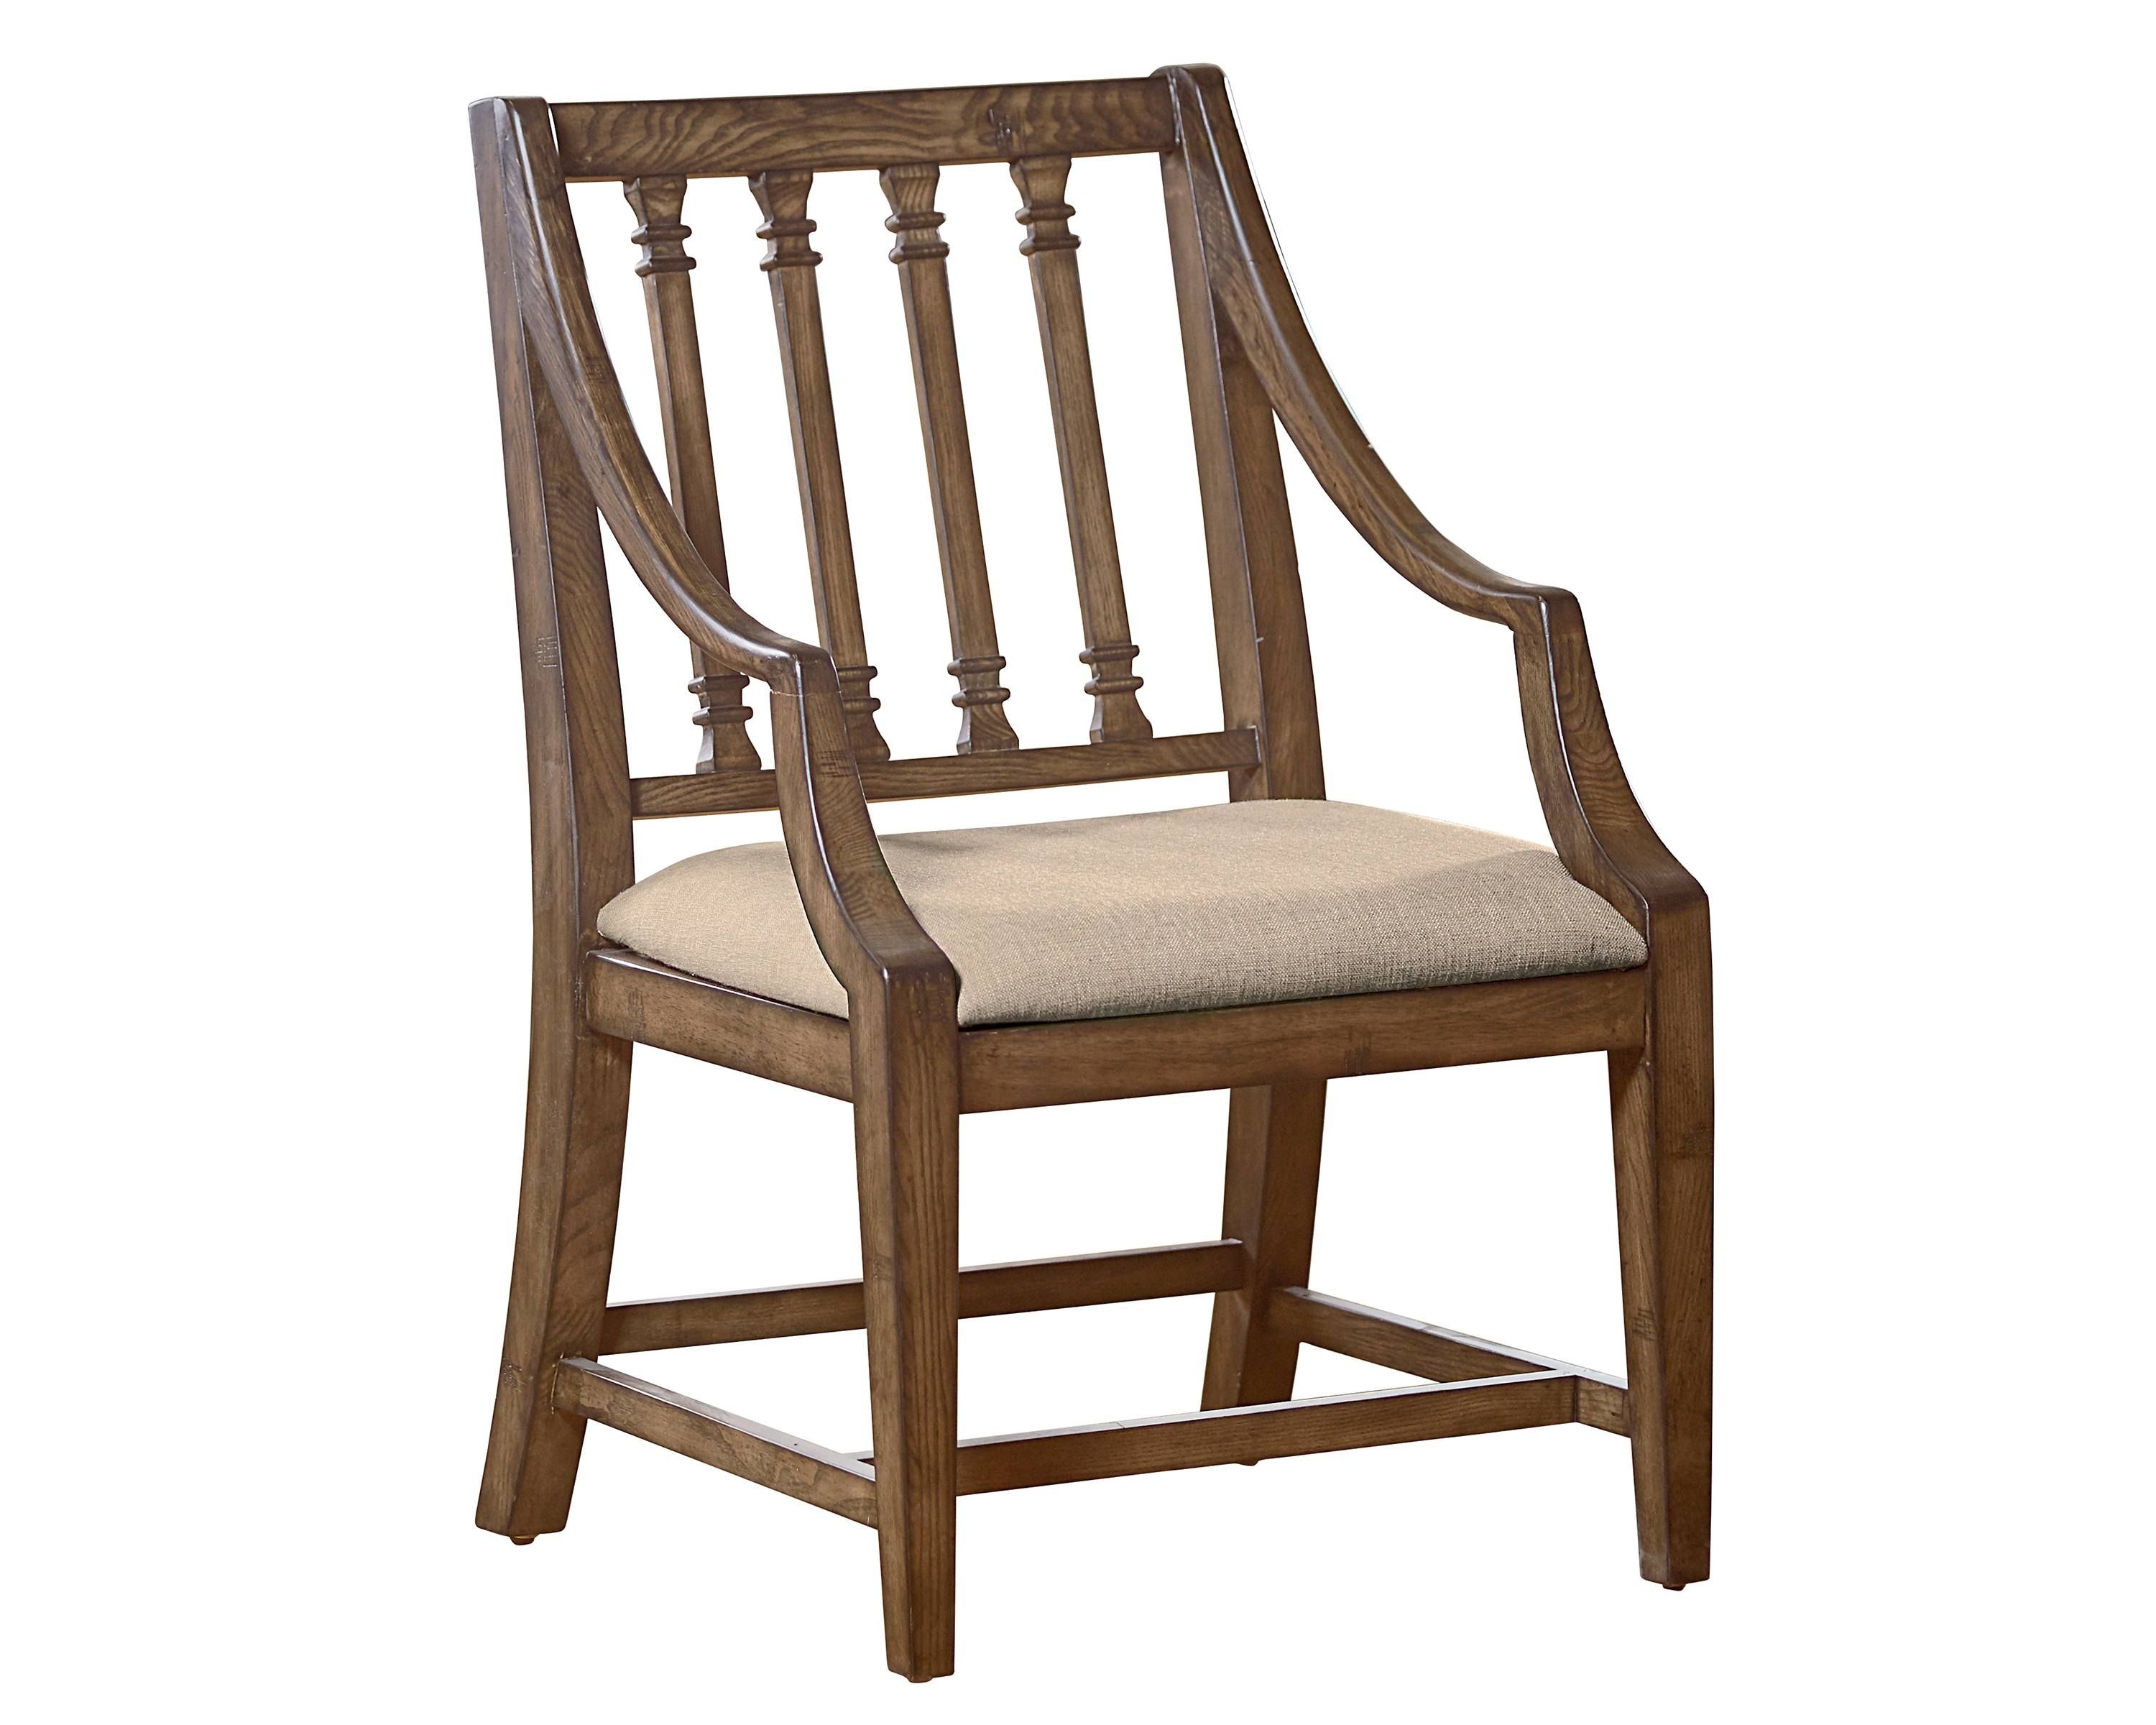 Most Current Revival Arm Chair – Magnolia Home Pertaining To Magnolia Home Revival Arm Chairs (View 2 of 20)